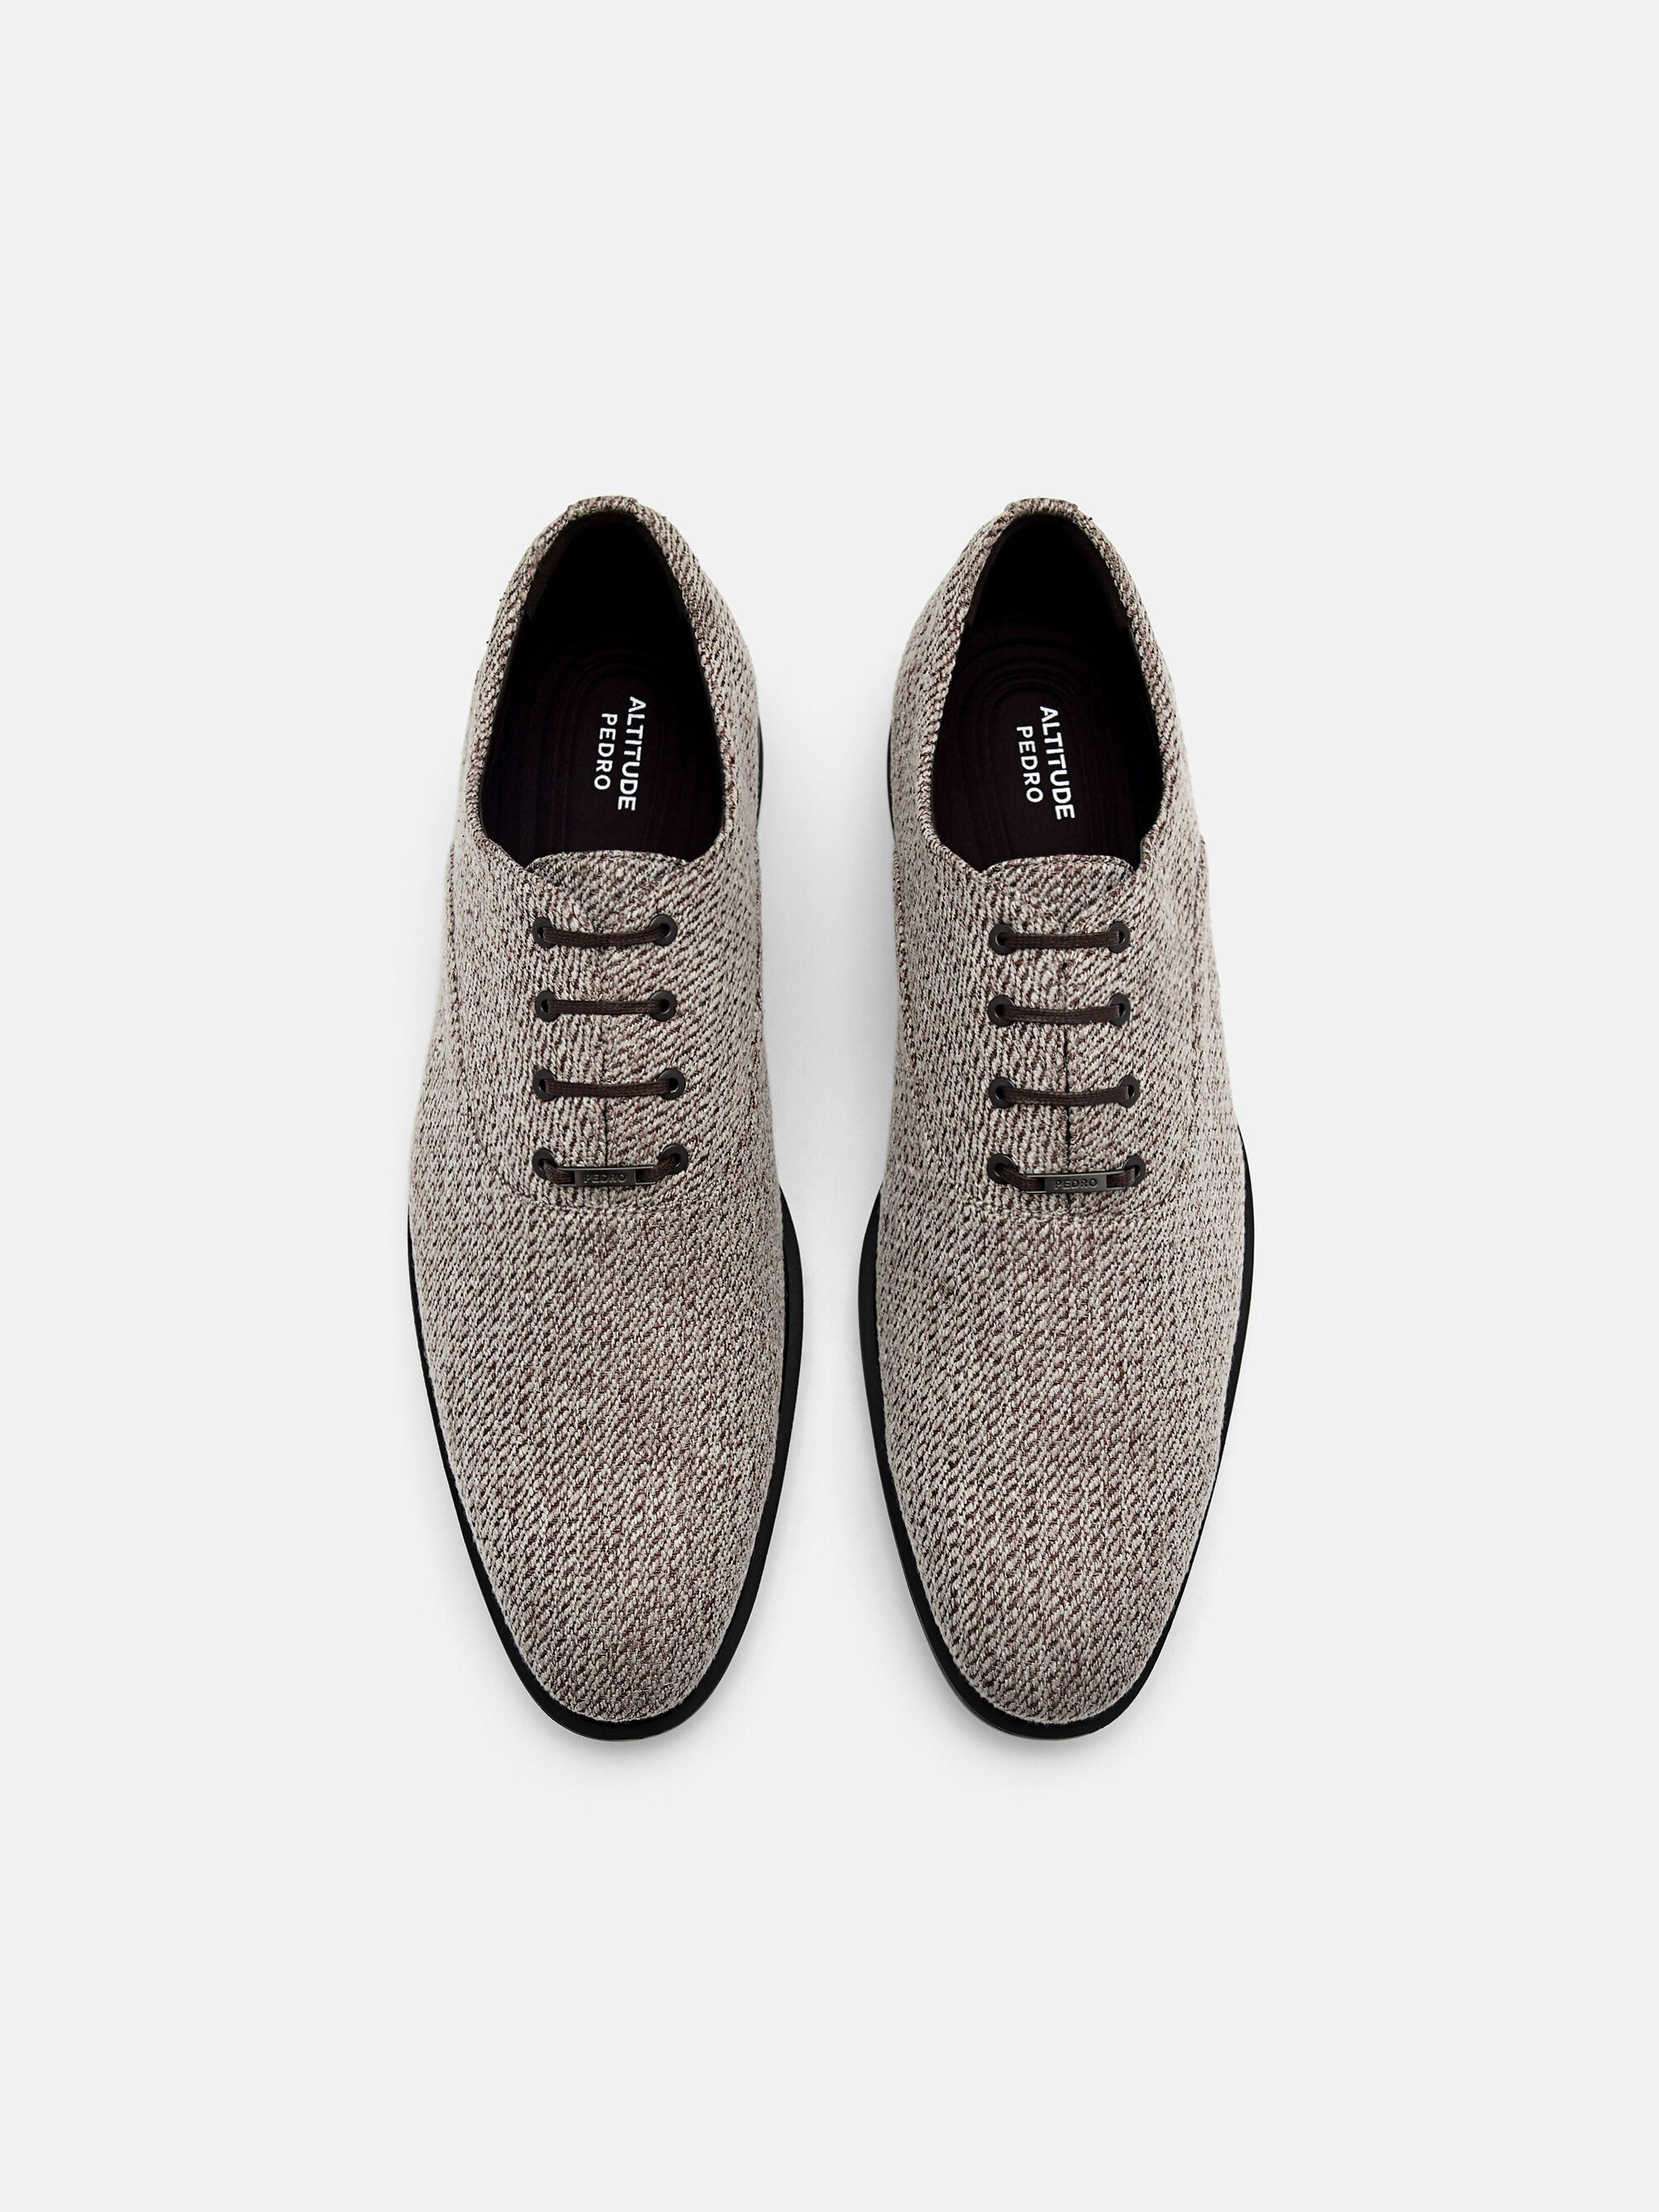 Altitude Lightweight Oxford Shoes, Taupe